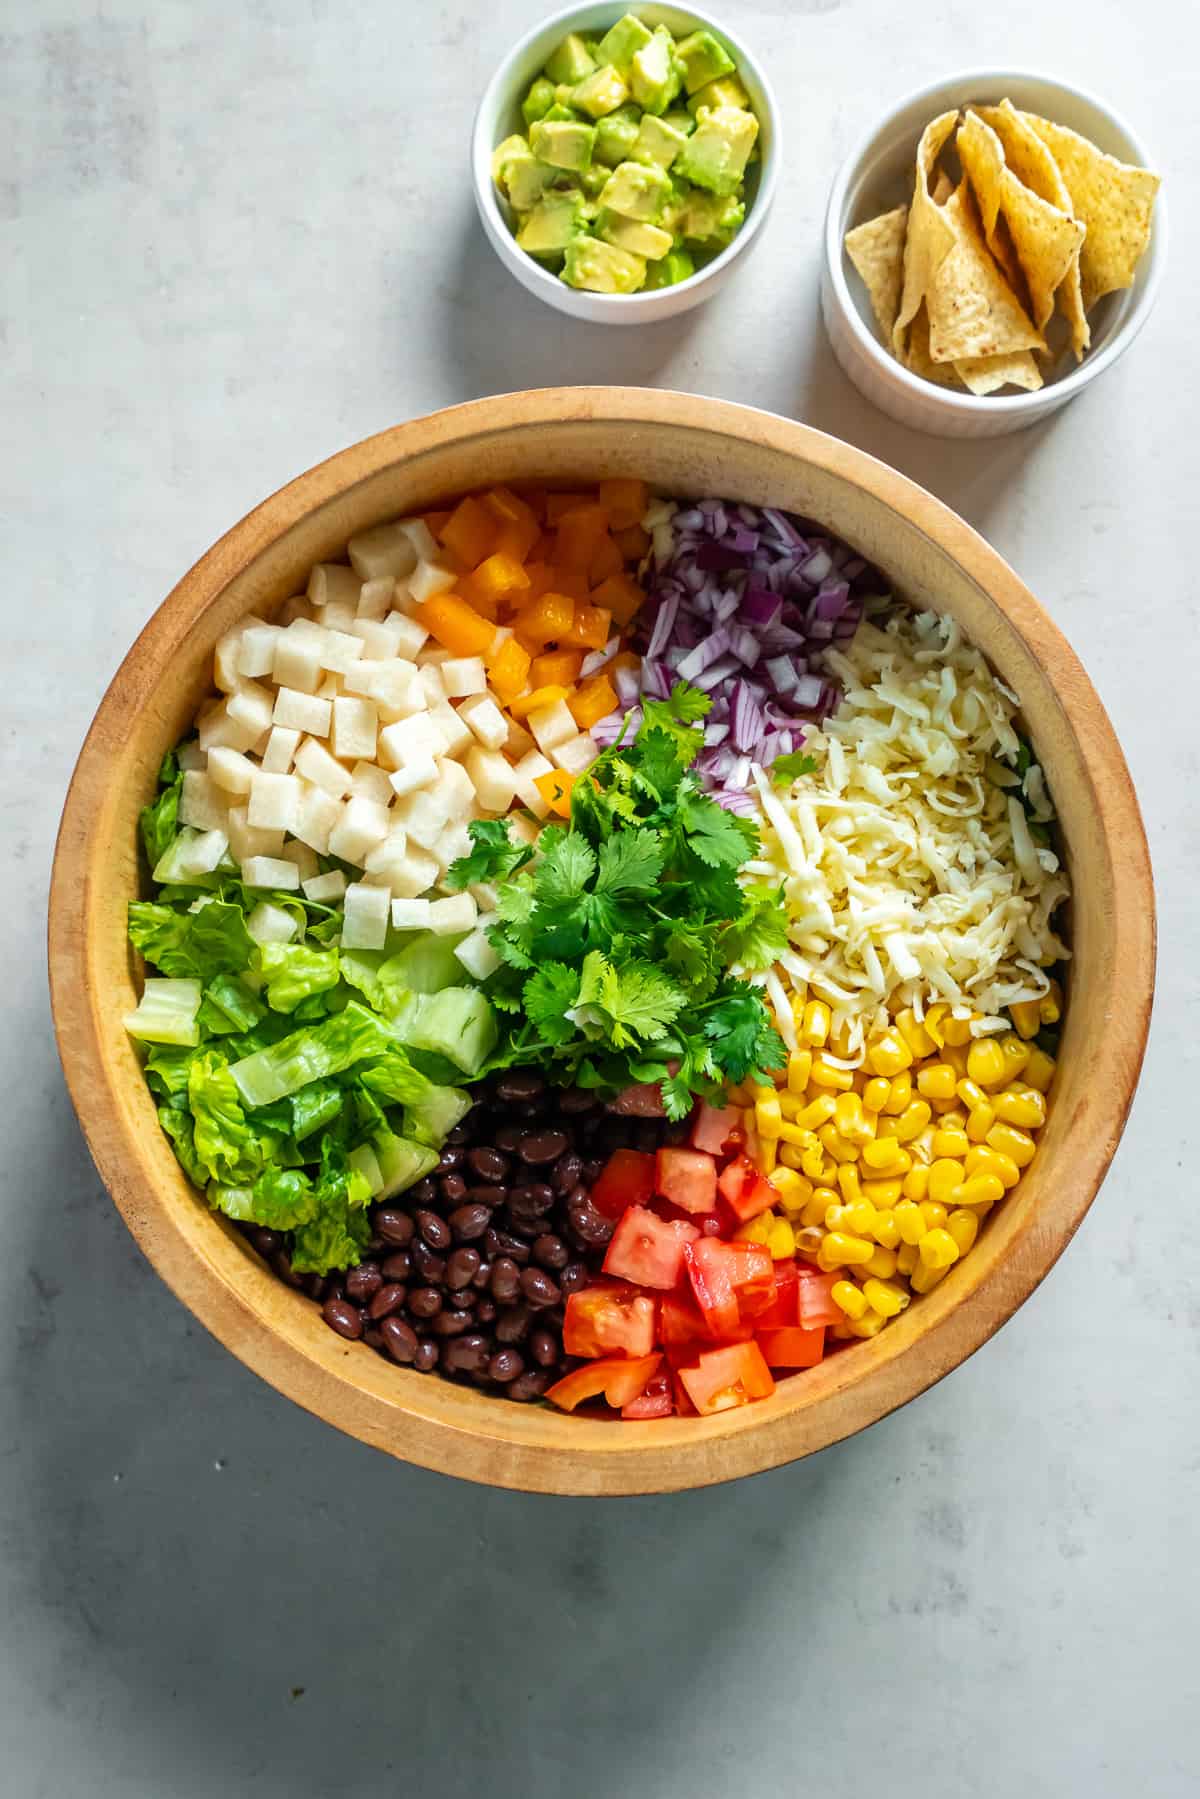 Southwest Chopped Salad ingredients in neat rows in a wood salad bowl.